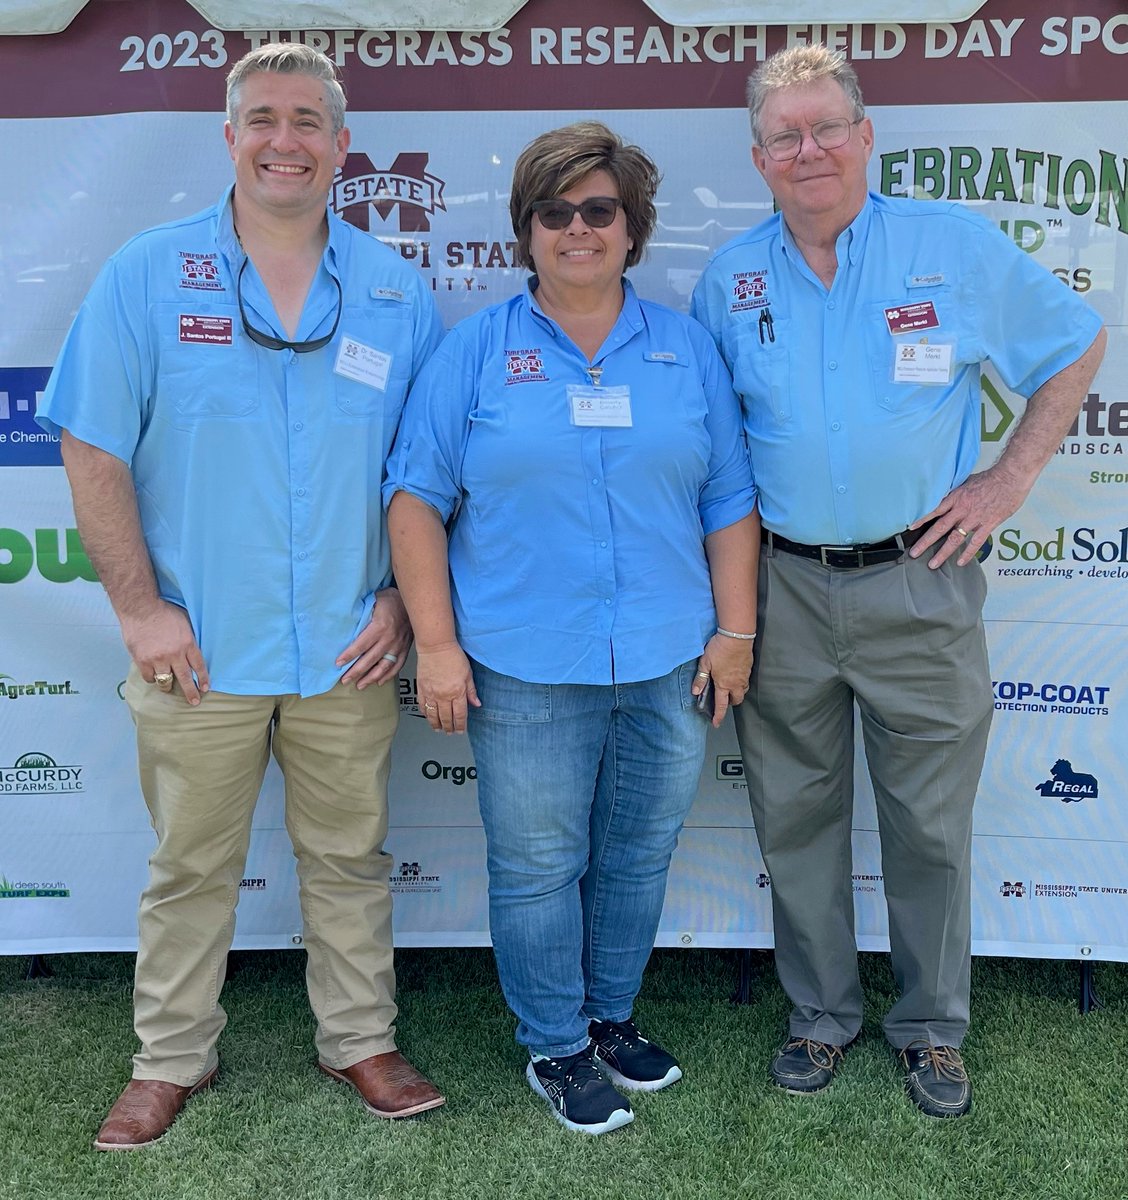 #MSUext #Entomology had a great time today helping out with #MSUTurfFieldDay23
#TurfManagement #PestManagement #BCHEPP #UrbanEntomology #LandscapeEntomology #PesticideSafety